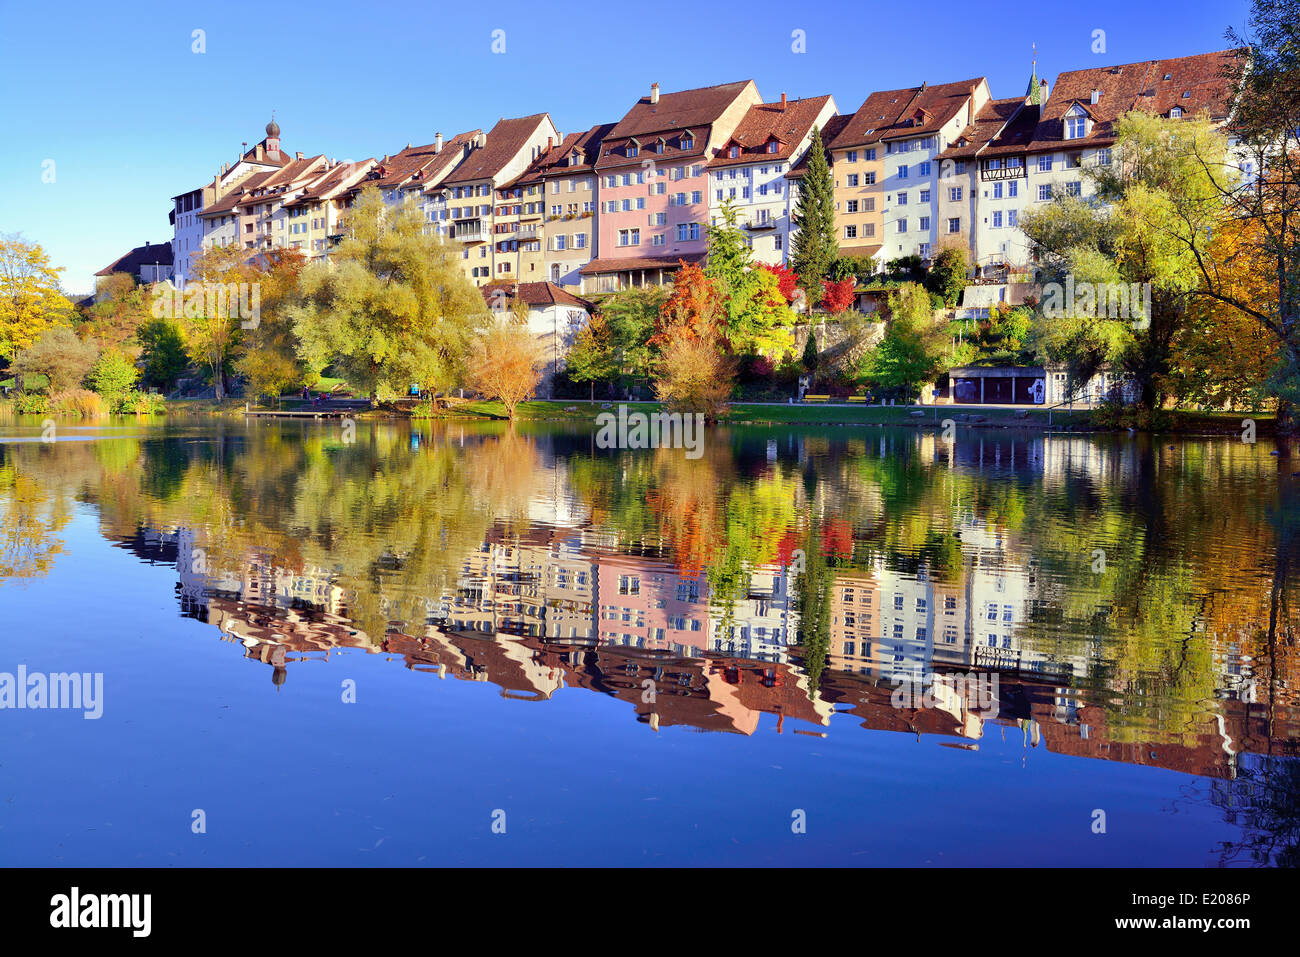 Historic centre of Wil with reflection in pond of municipal park, Canton of St. Gallen, Switzerland Stock Photo